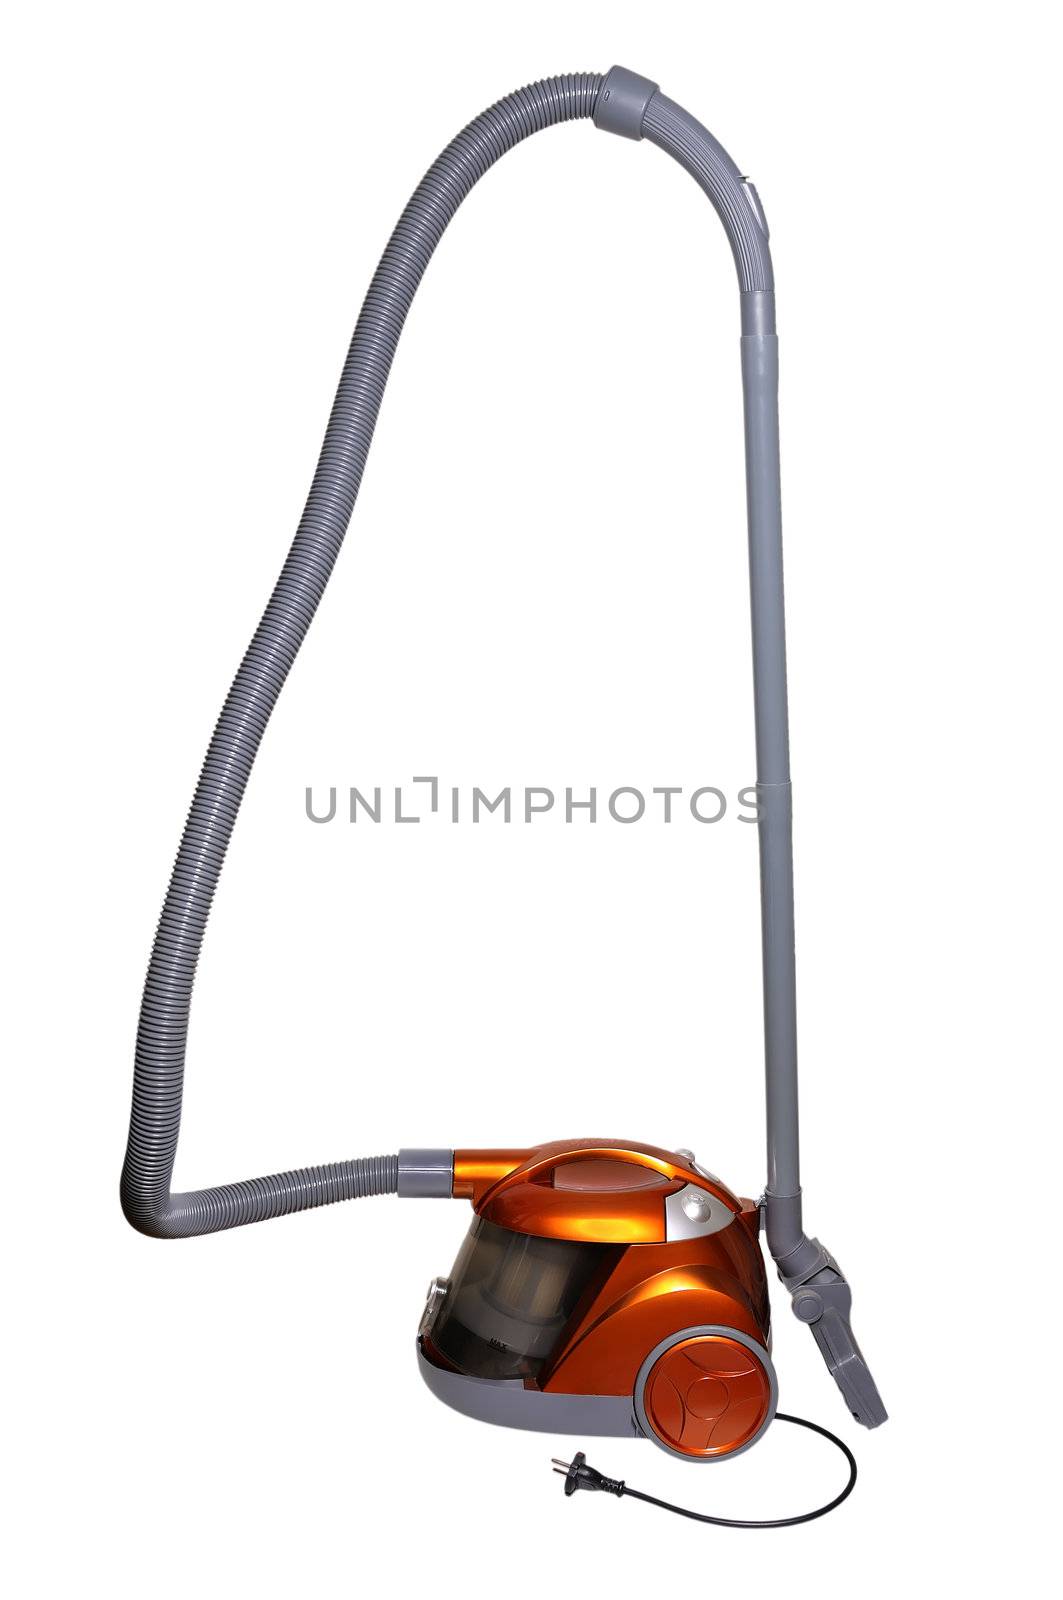 vacuum cleaner on a white background